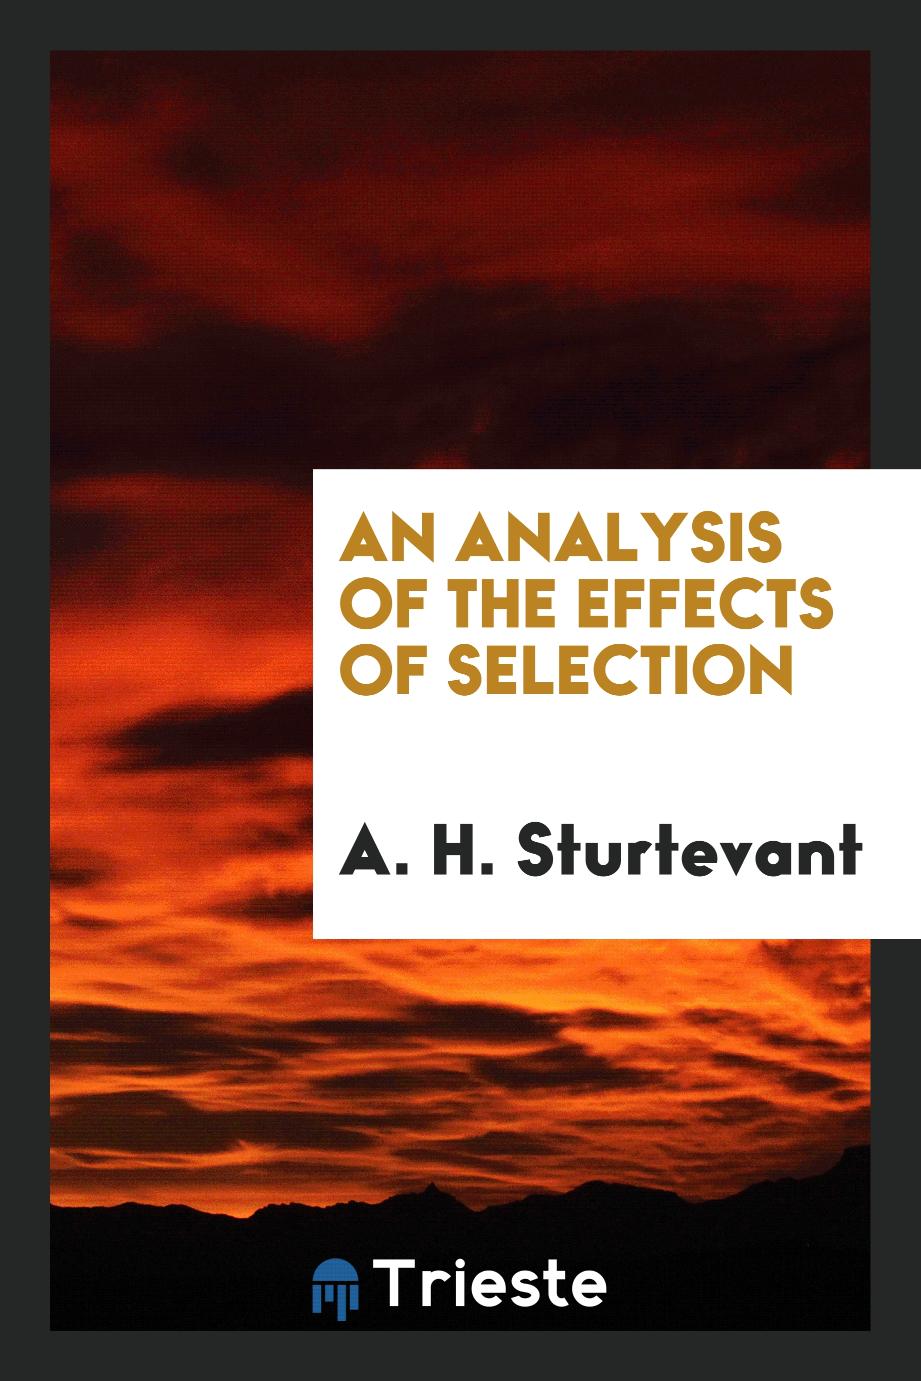 An Analysis of the Effects of Selection